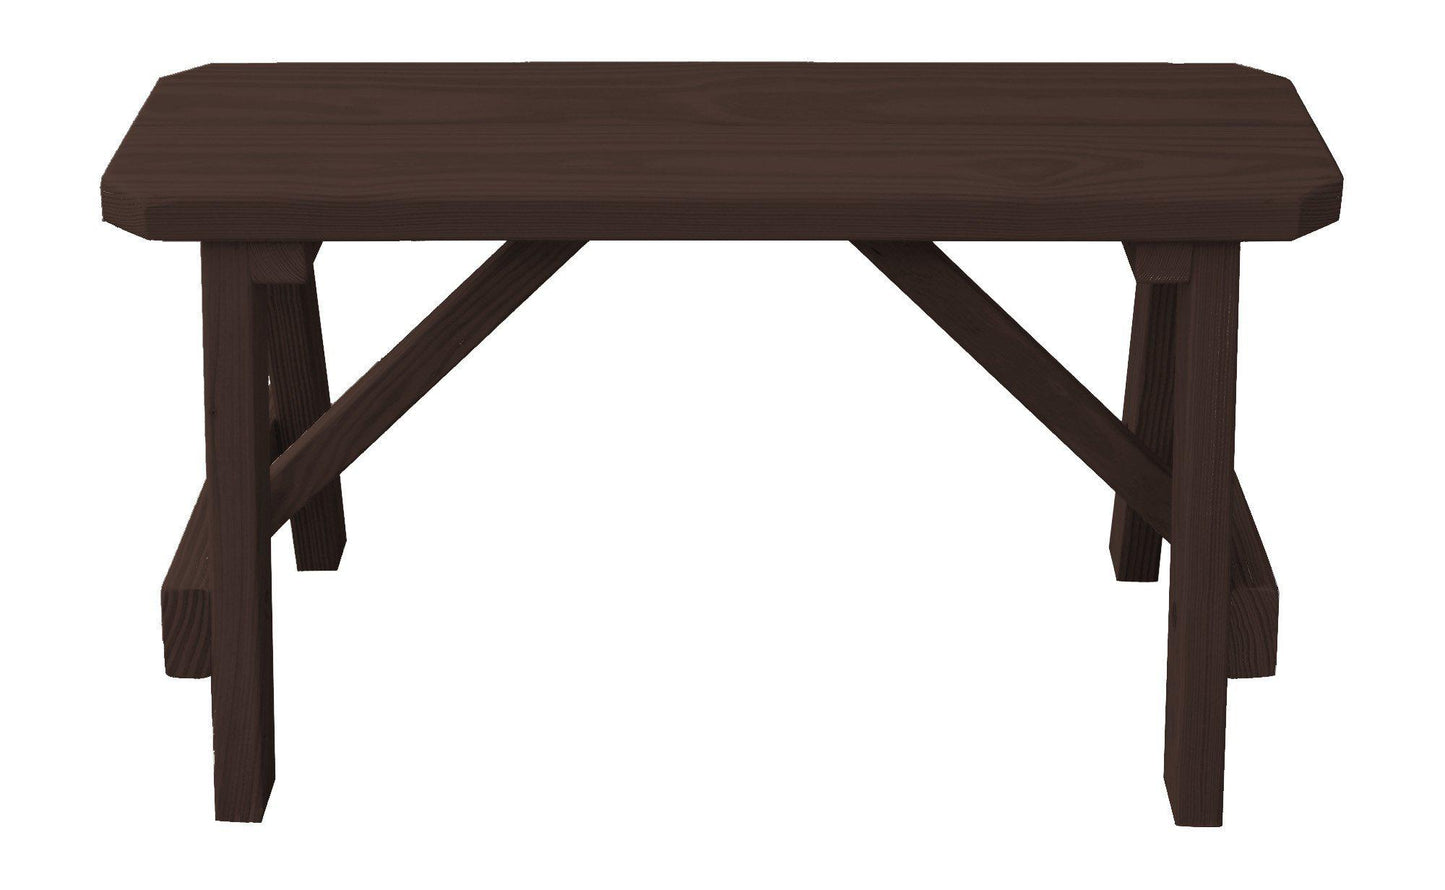 A&L Furniture Co. Yellow Pine 33" Traditional Bench Only - LEAD TIME TO SHIP 10 BUSINESS DAYS